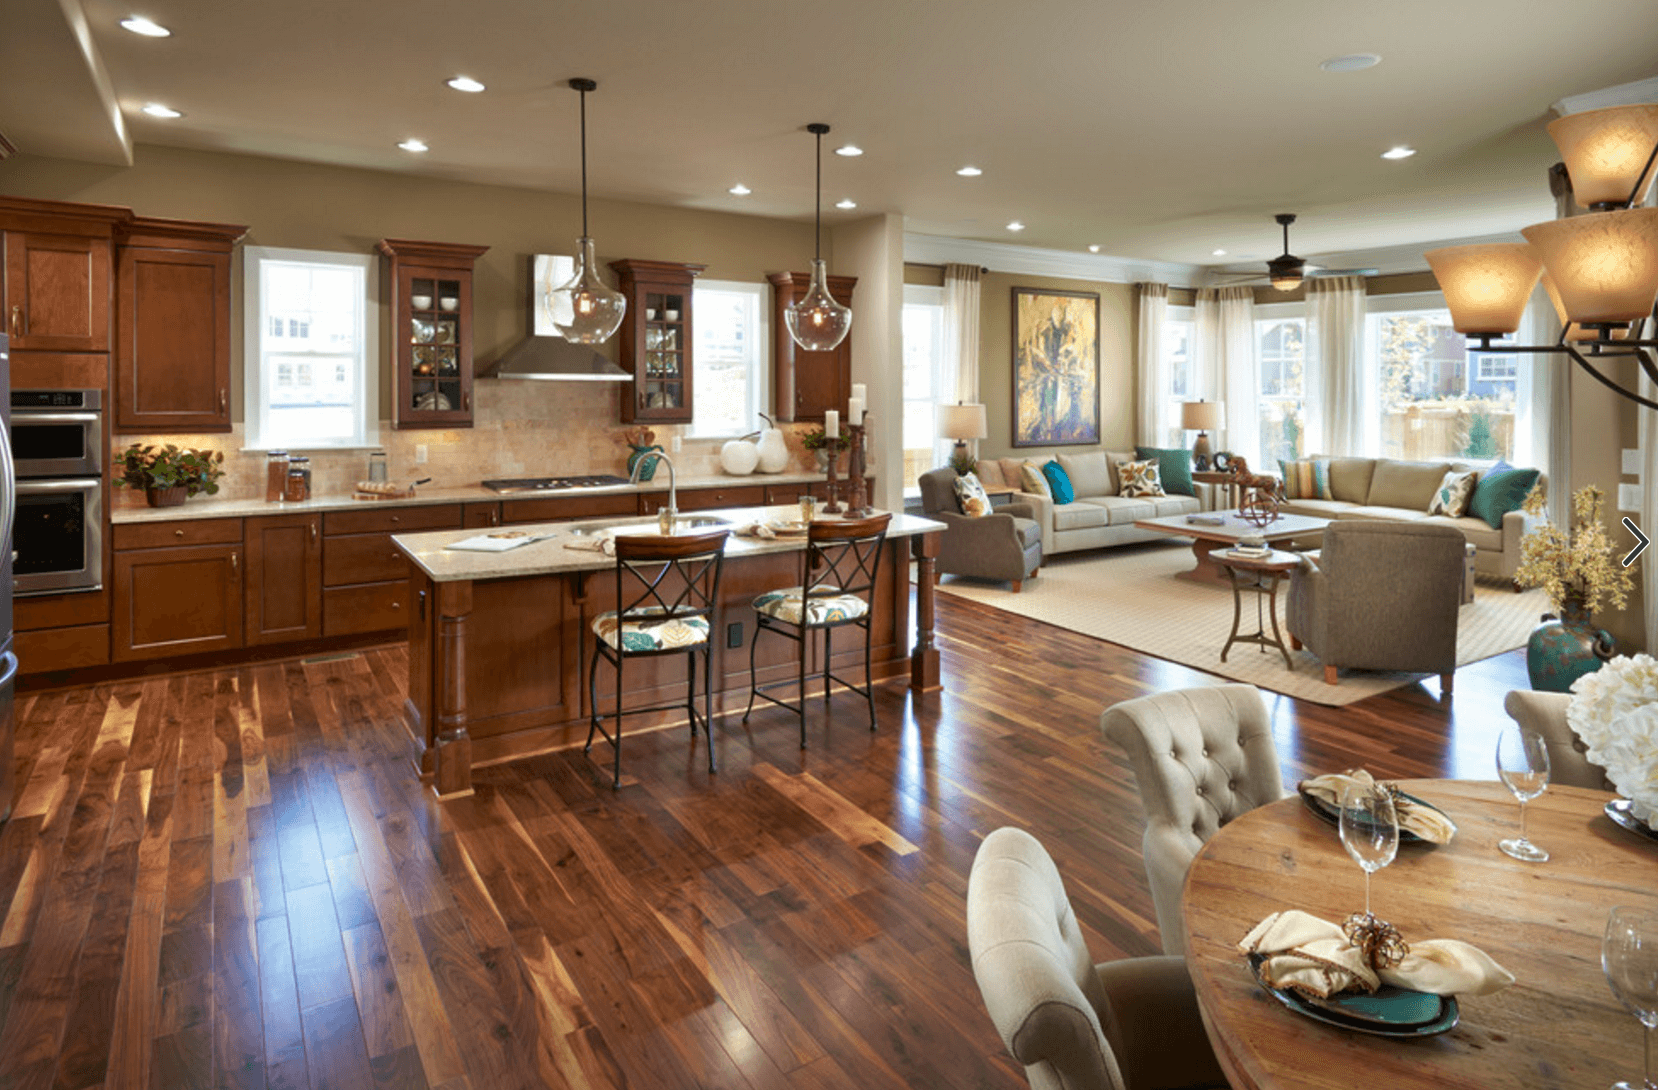 An open floor plan kitchen with a dining table and chairs.